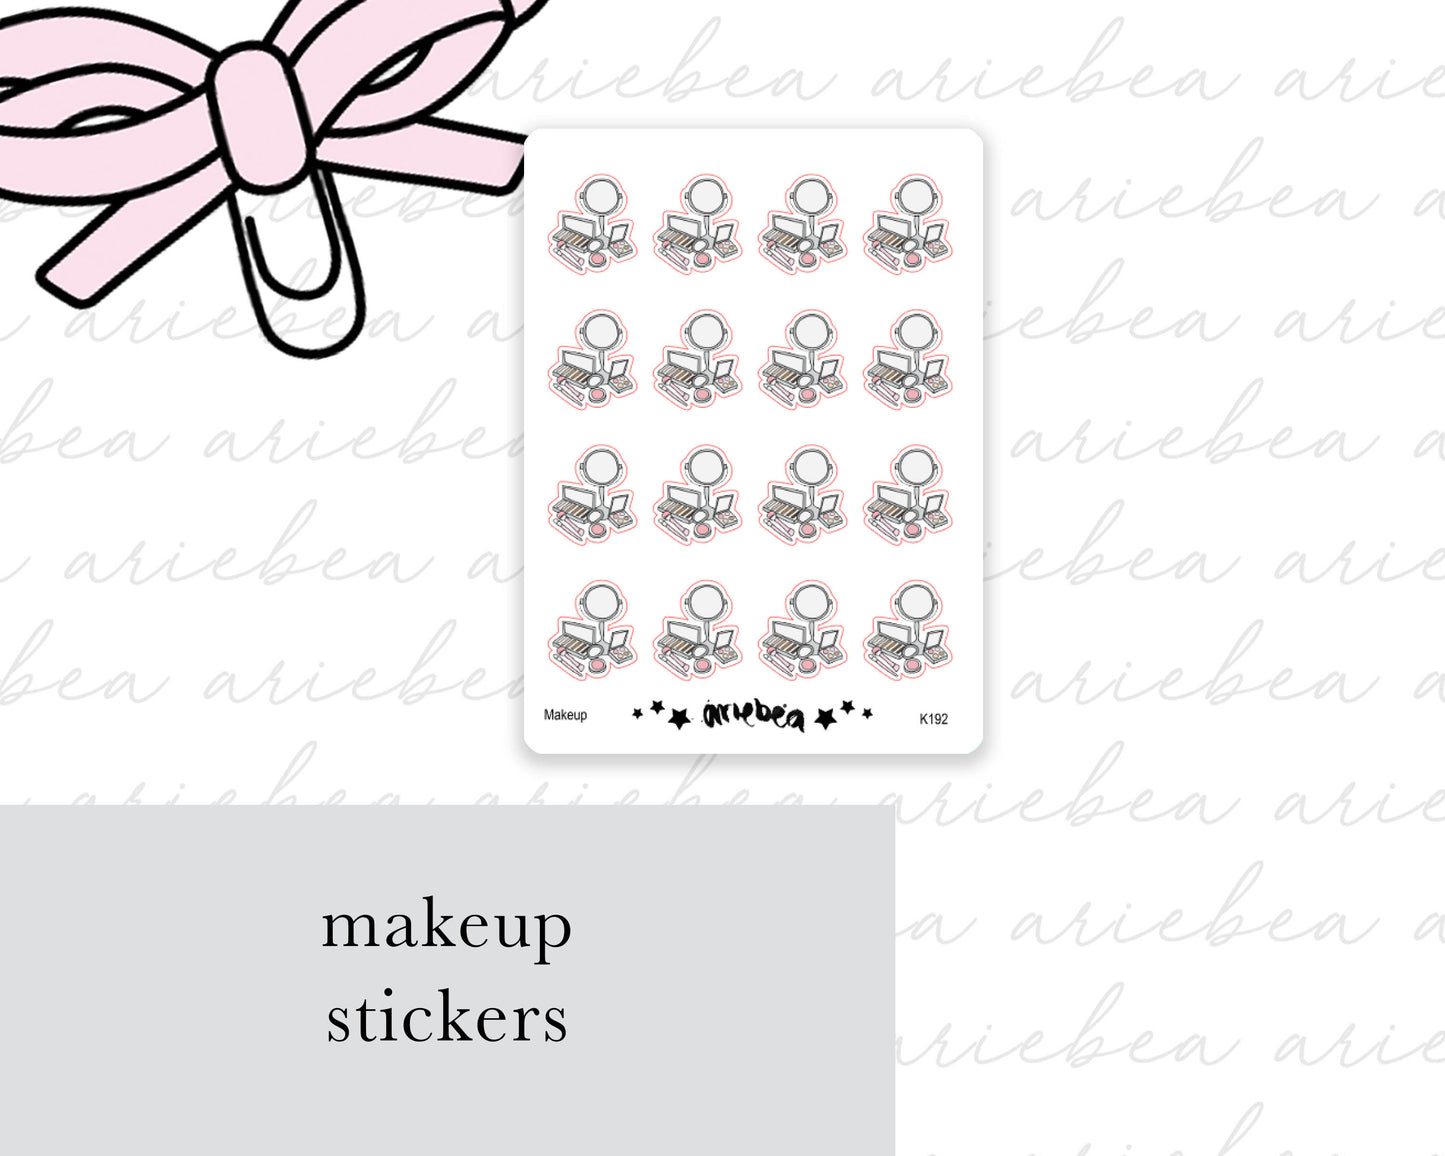 Makeup Self Care Routine Planner Stickers